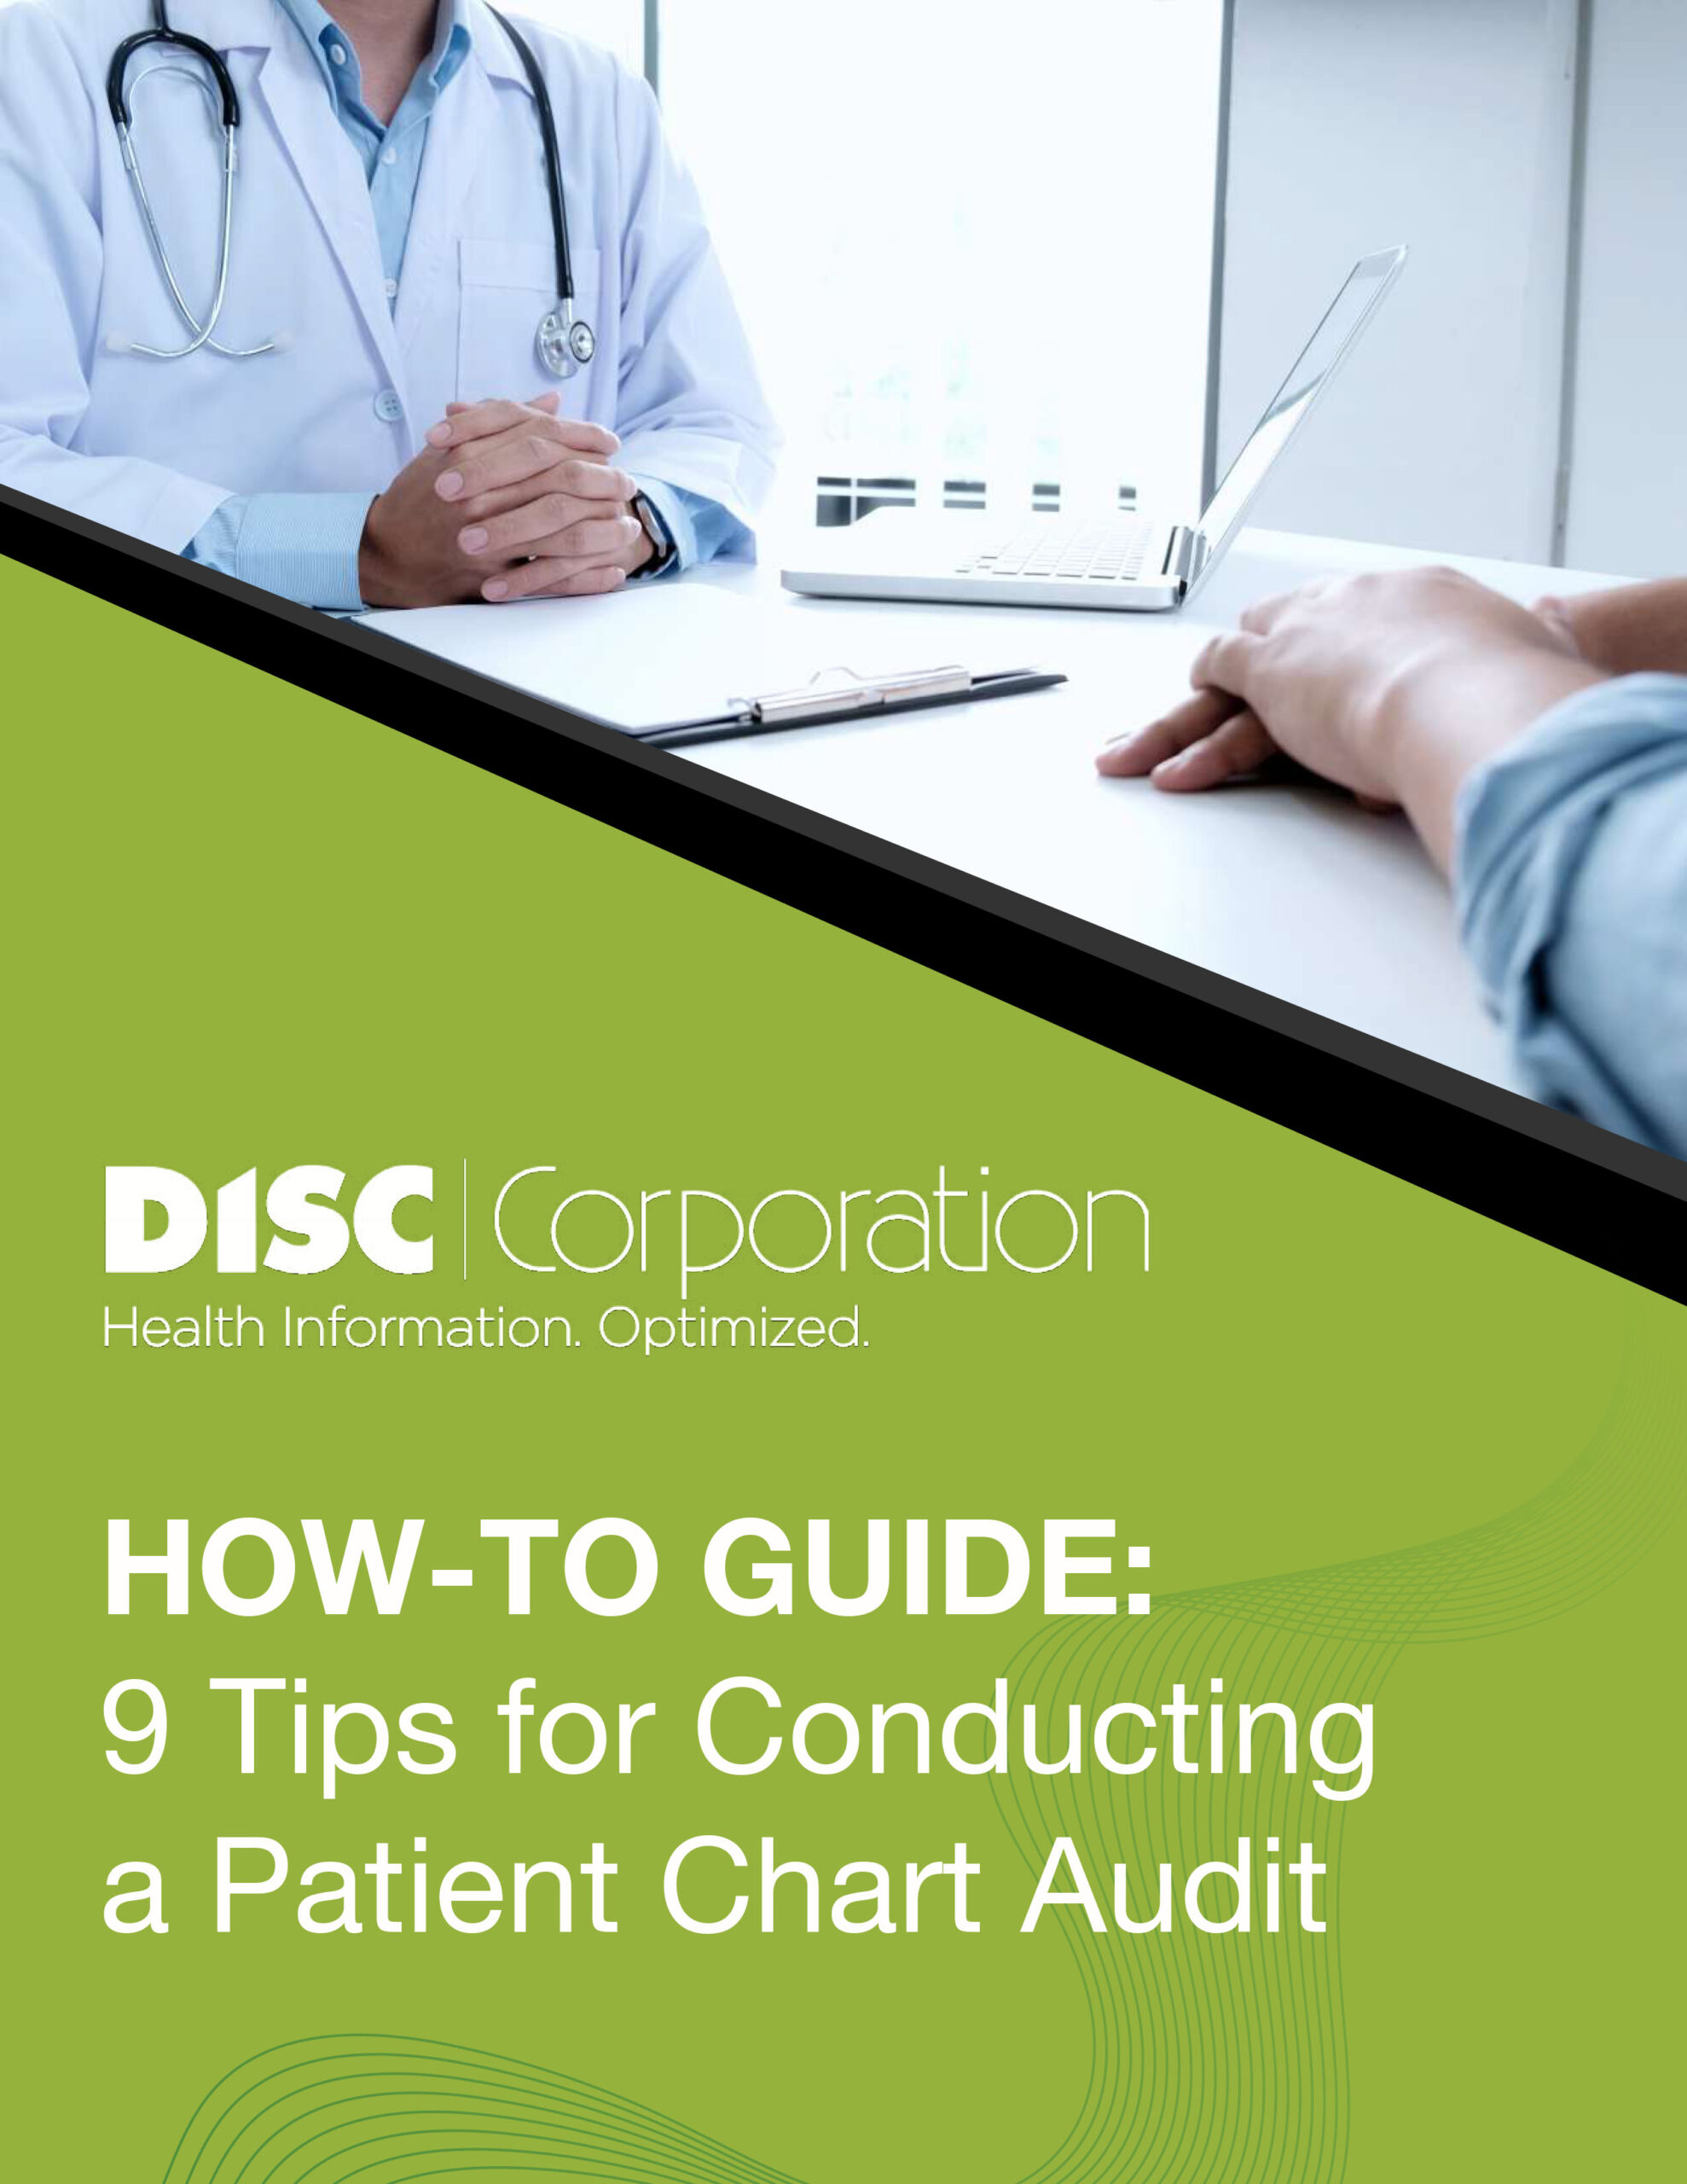 9 Tips for Conducting a Patient Chart Audit